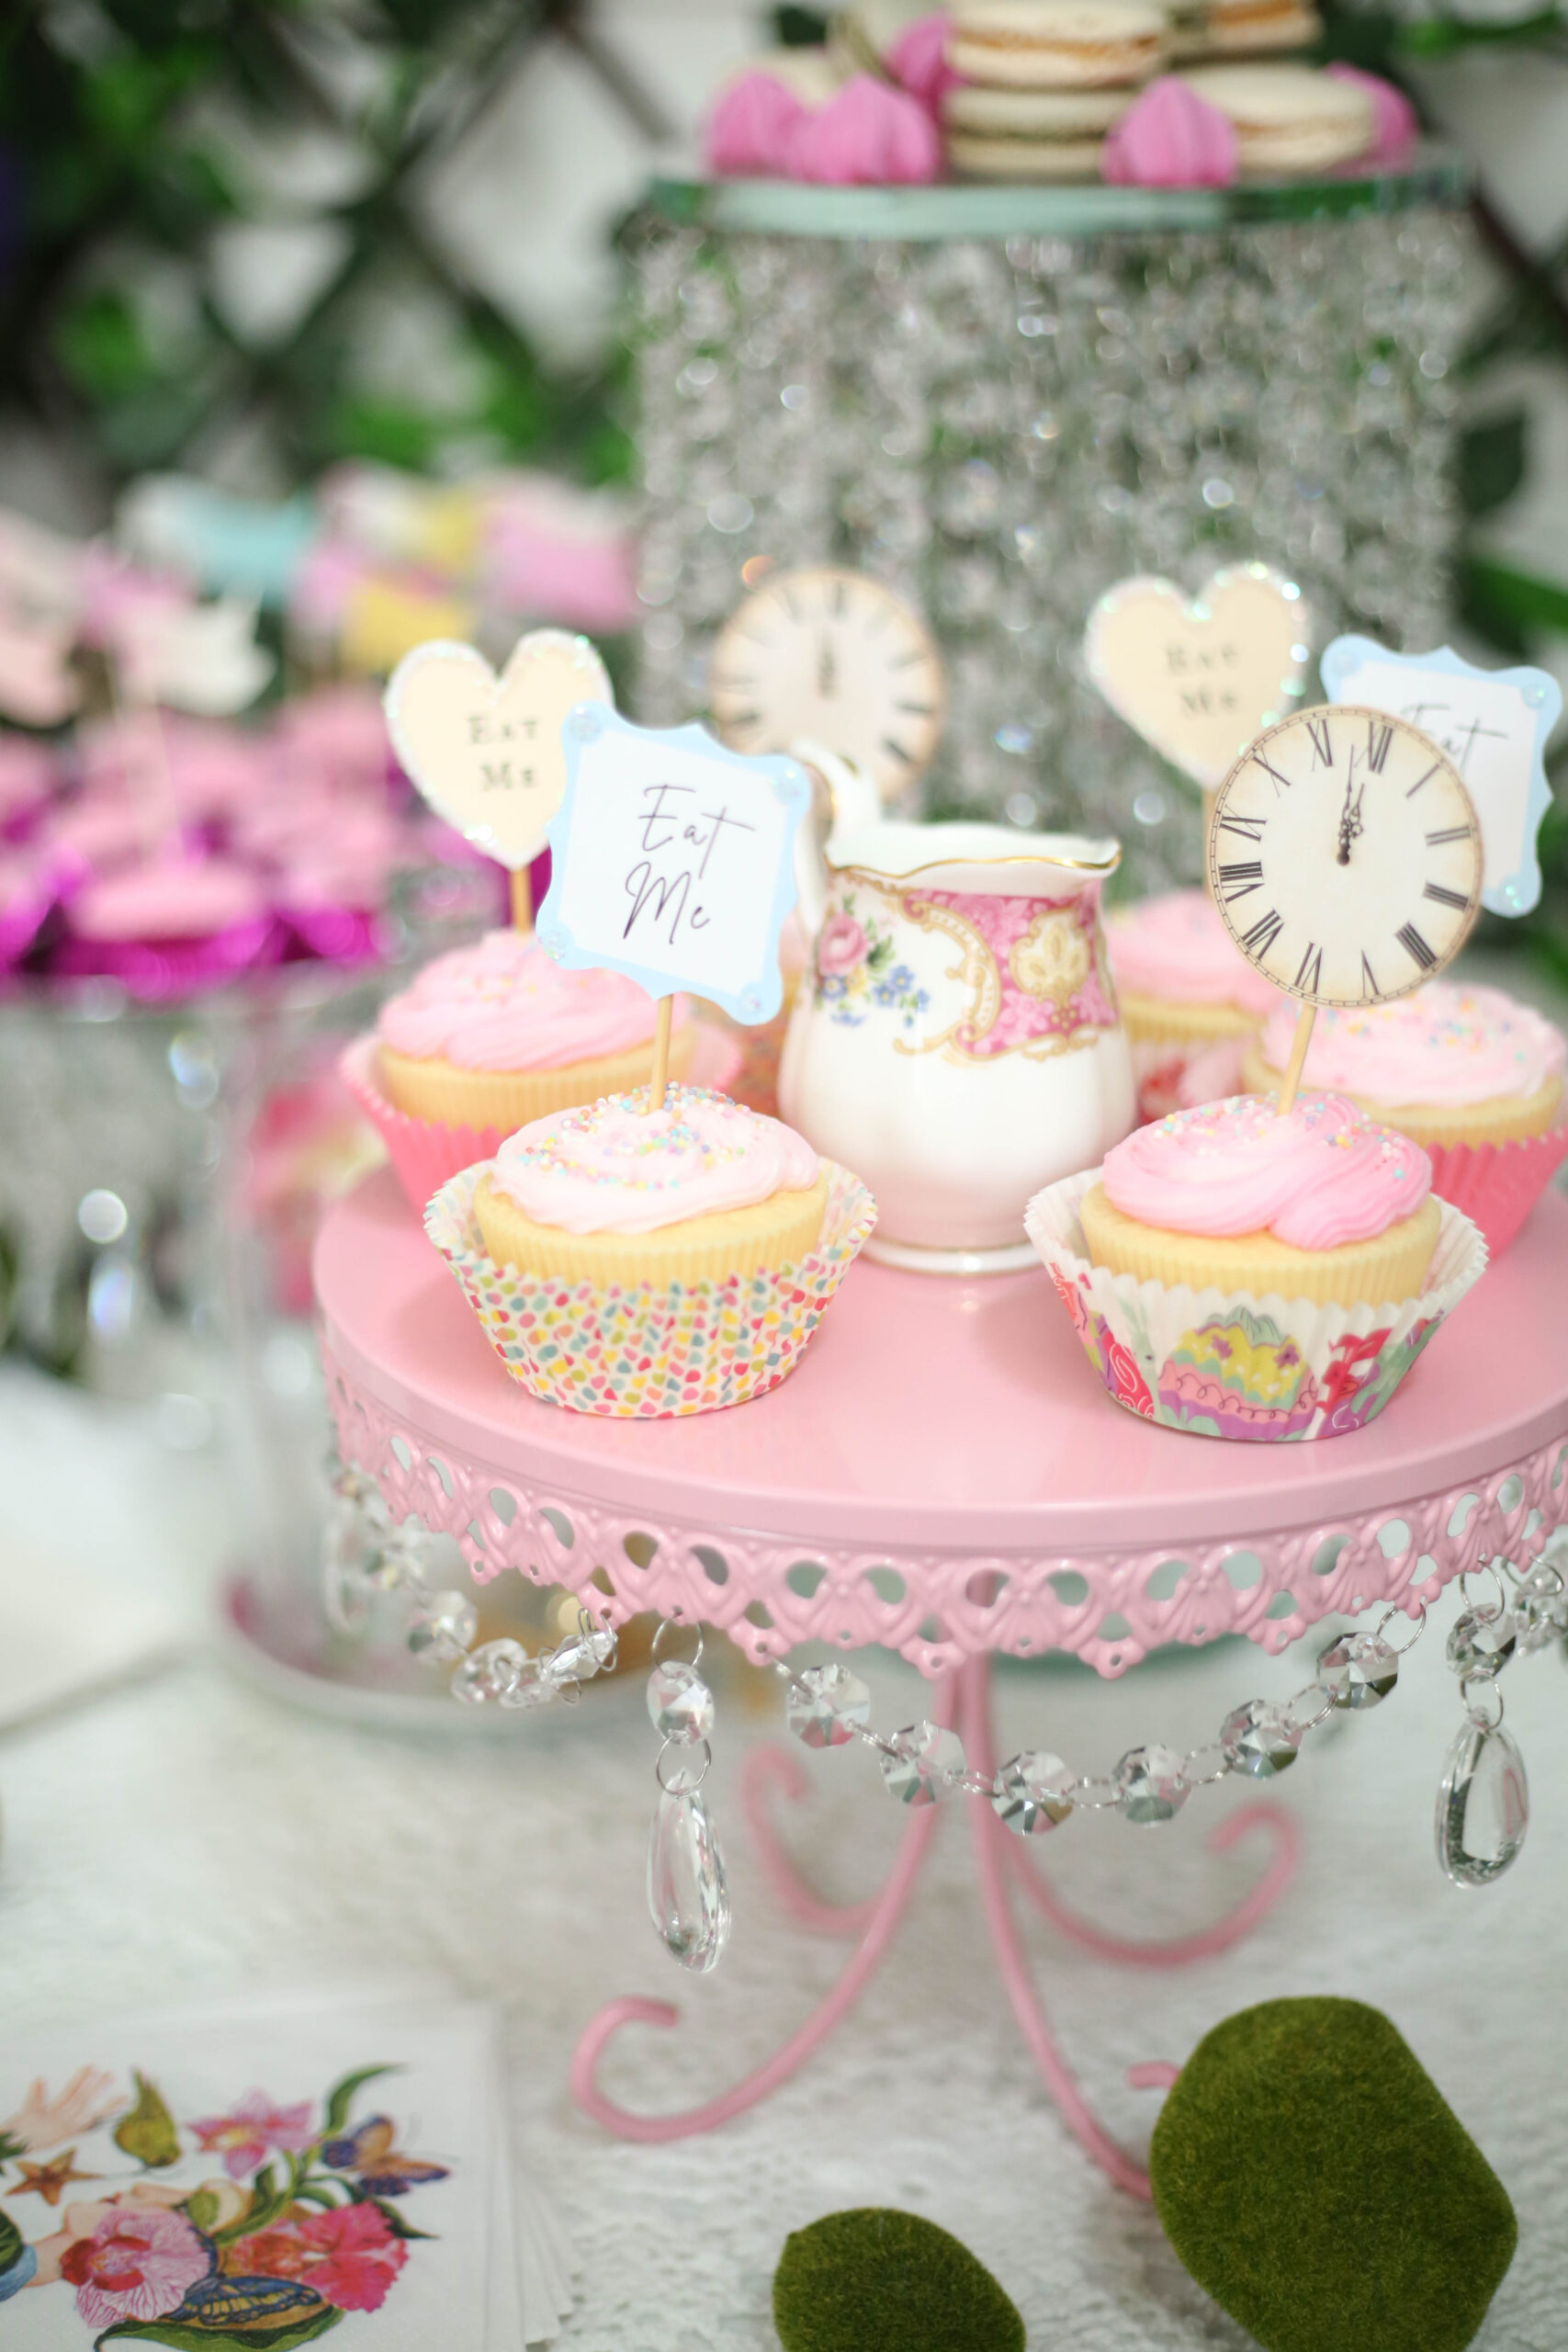 Easter cupcakes on a pink cake stand with crystals